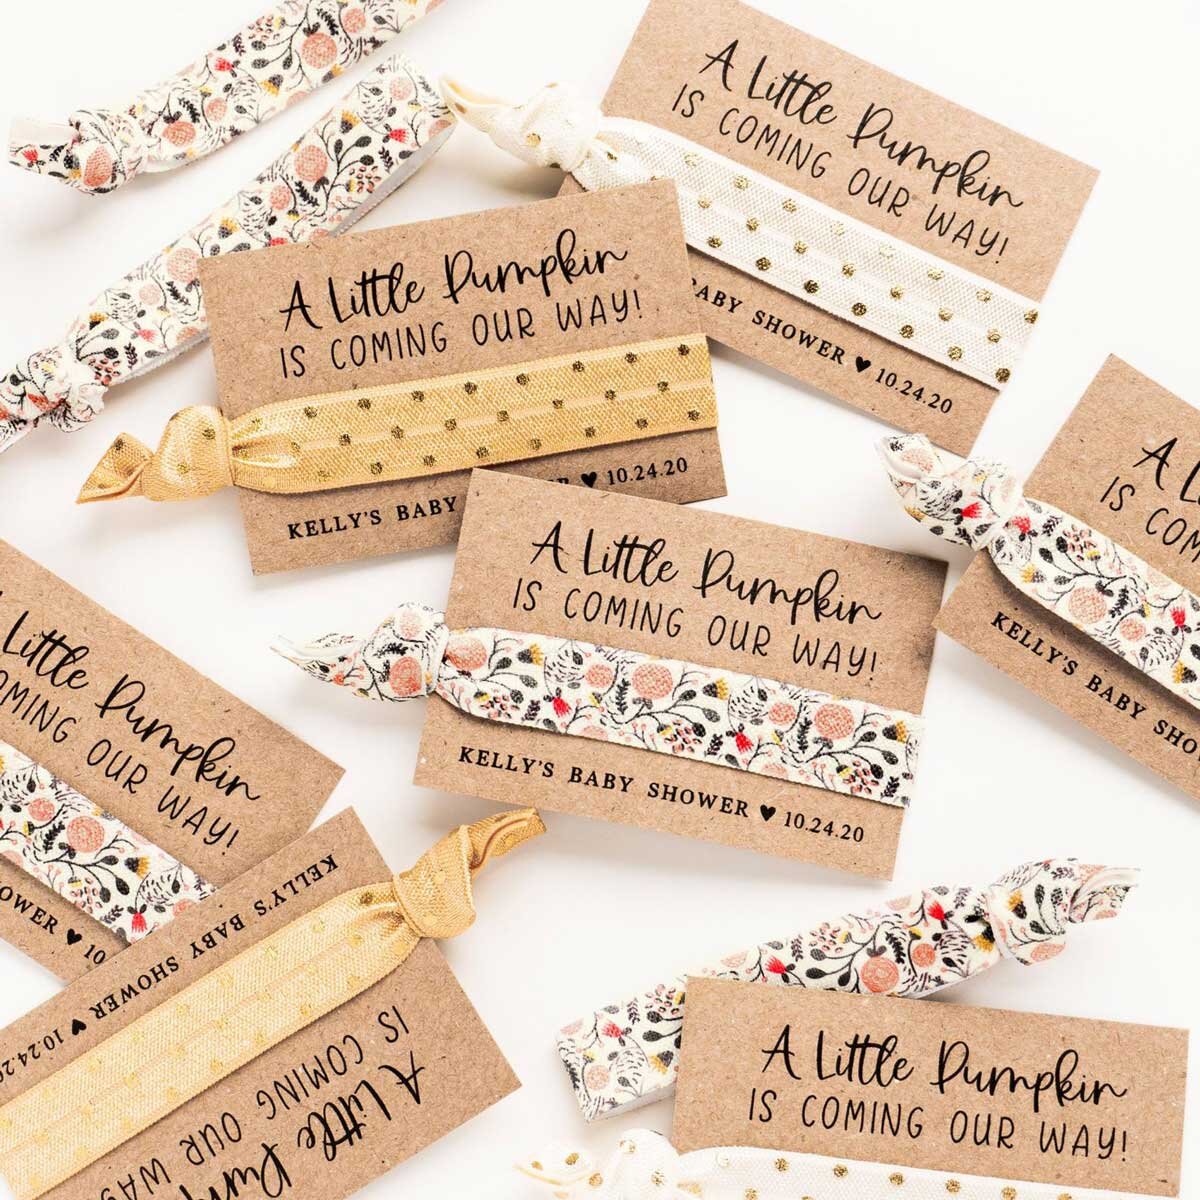 15 Cute Baby Shower Party Favor Ideas